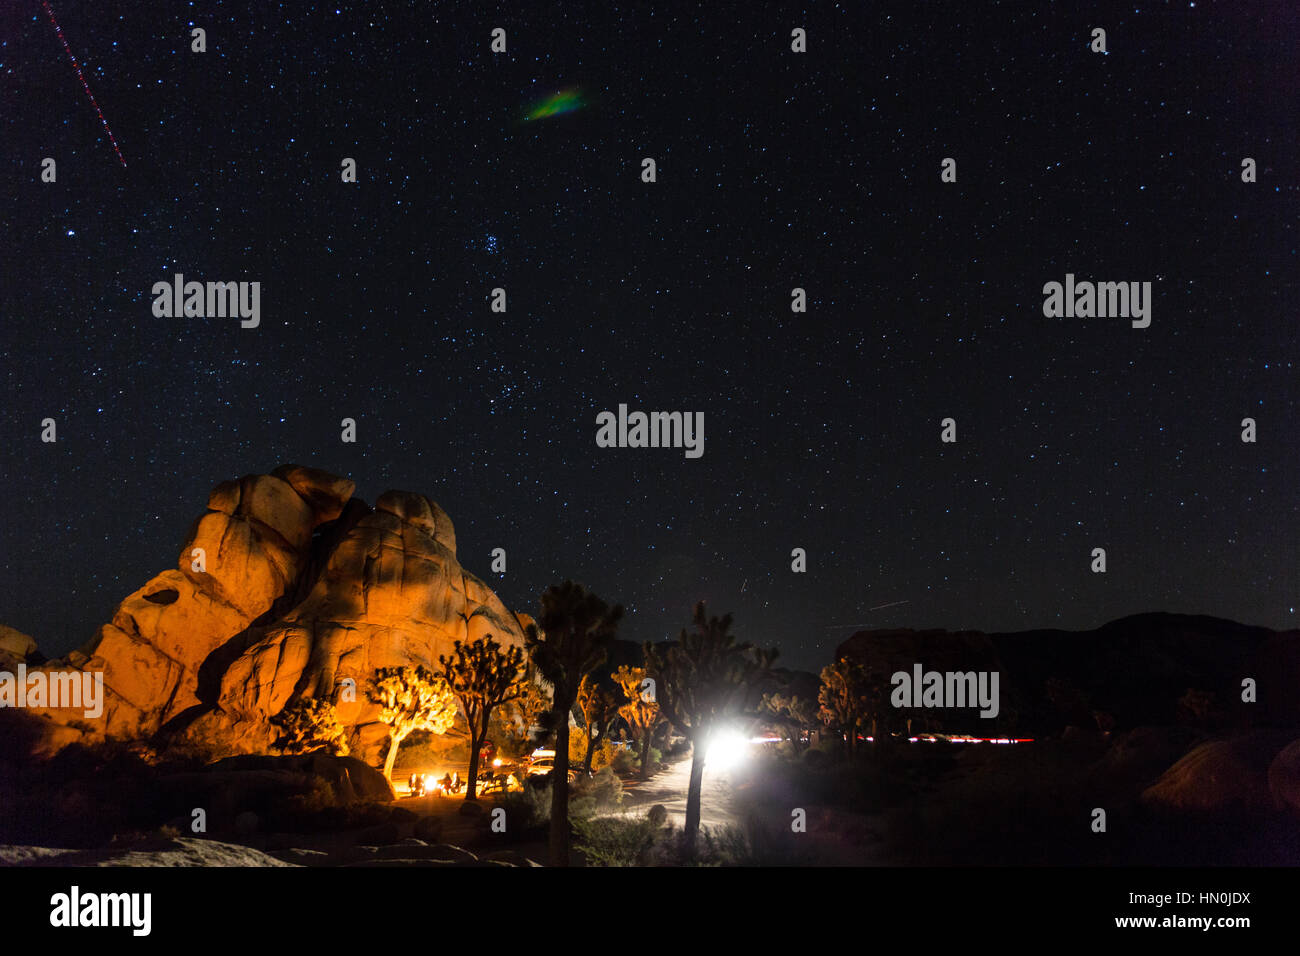 A campfire illuminates the rocks at Hidden Valley Campground in Joshua Tree National Park with several stars overheads. Stock Photo